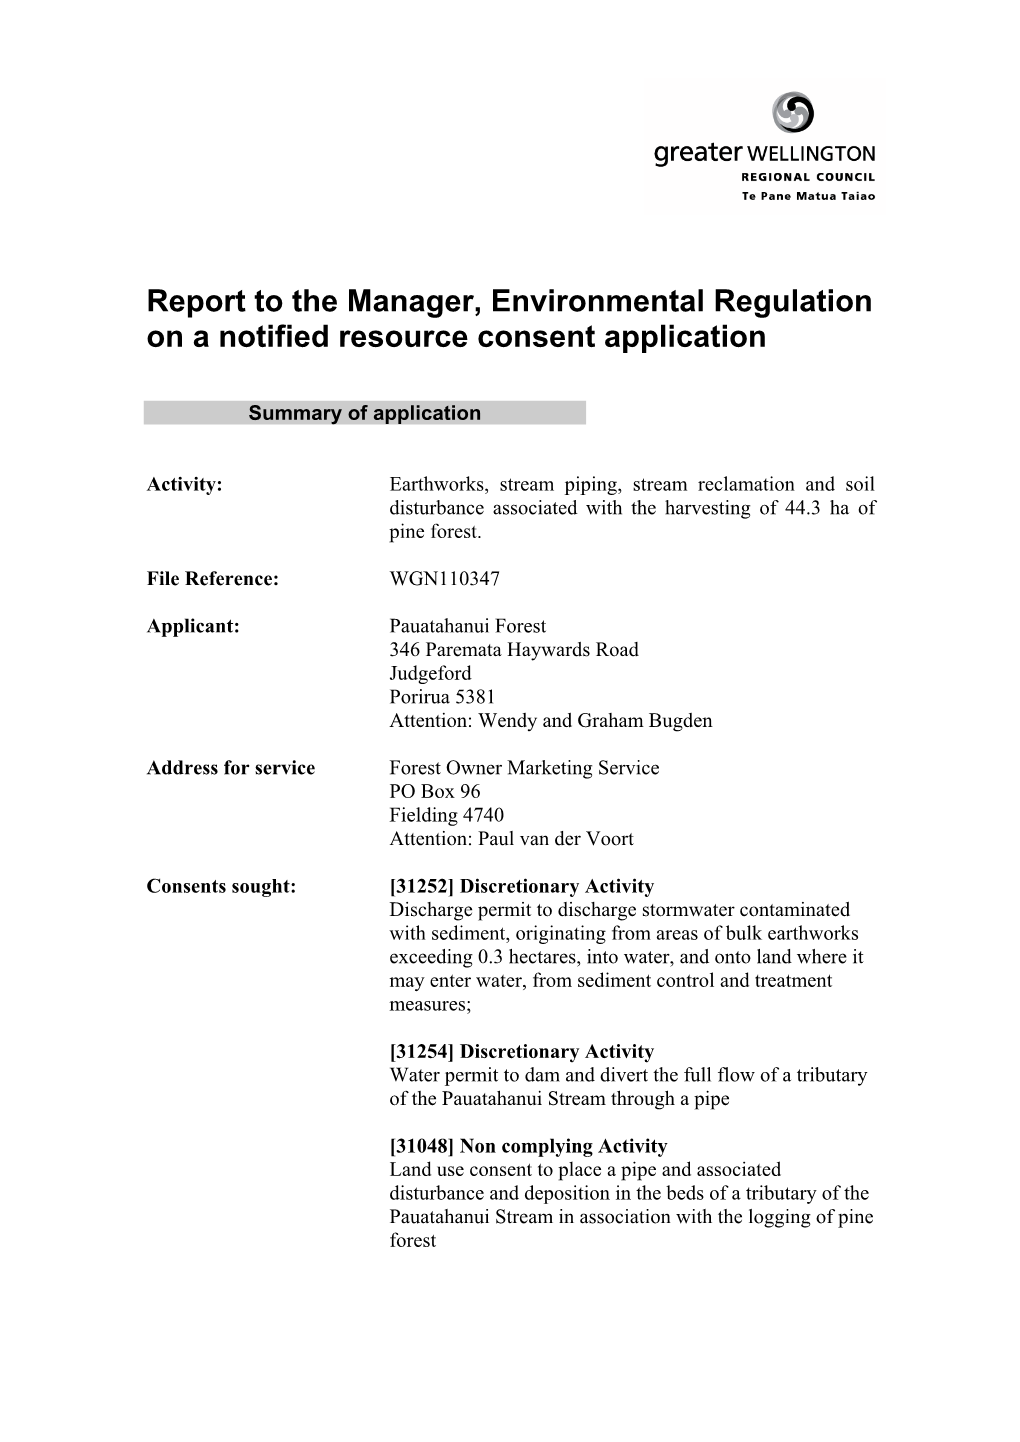 Report to the Manager, Environmental Regulation on a Notified Resource Consent Application